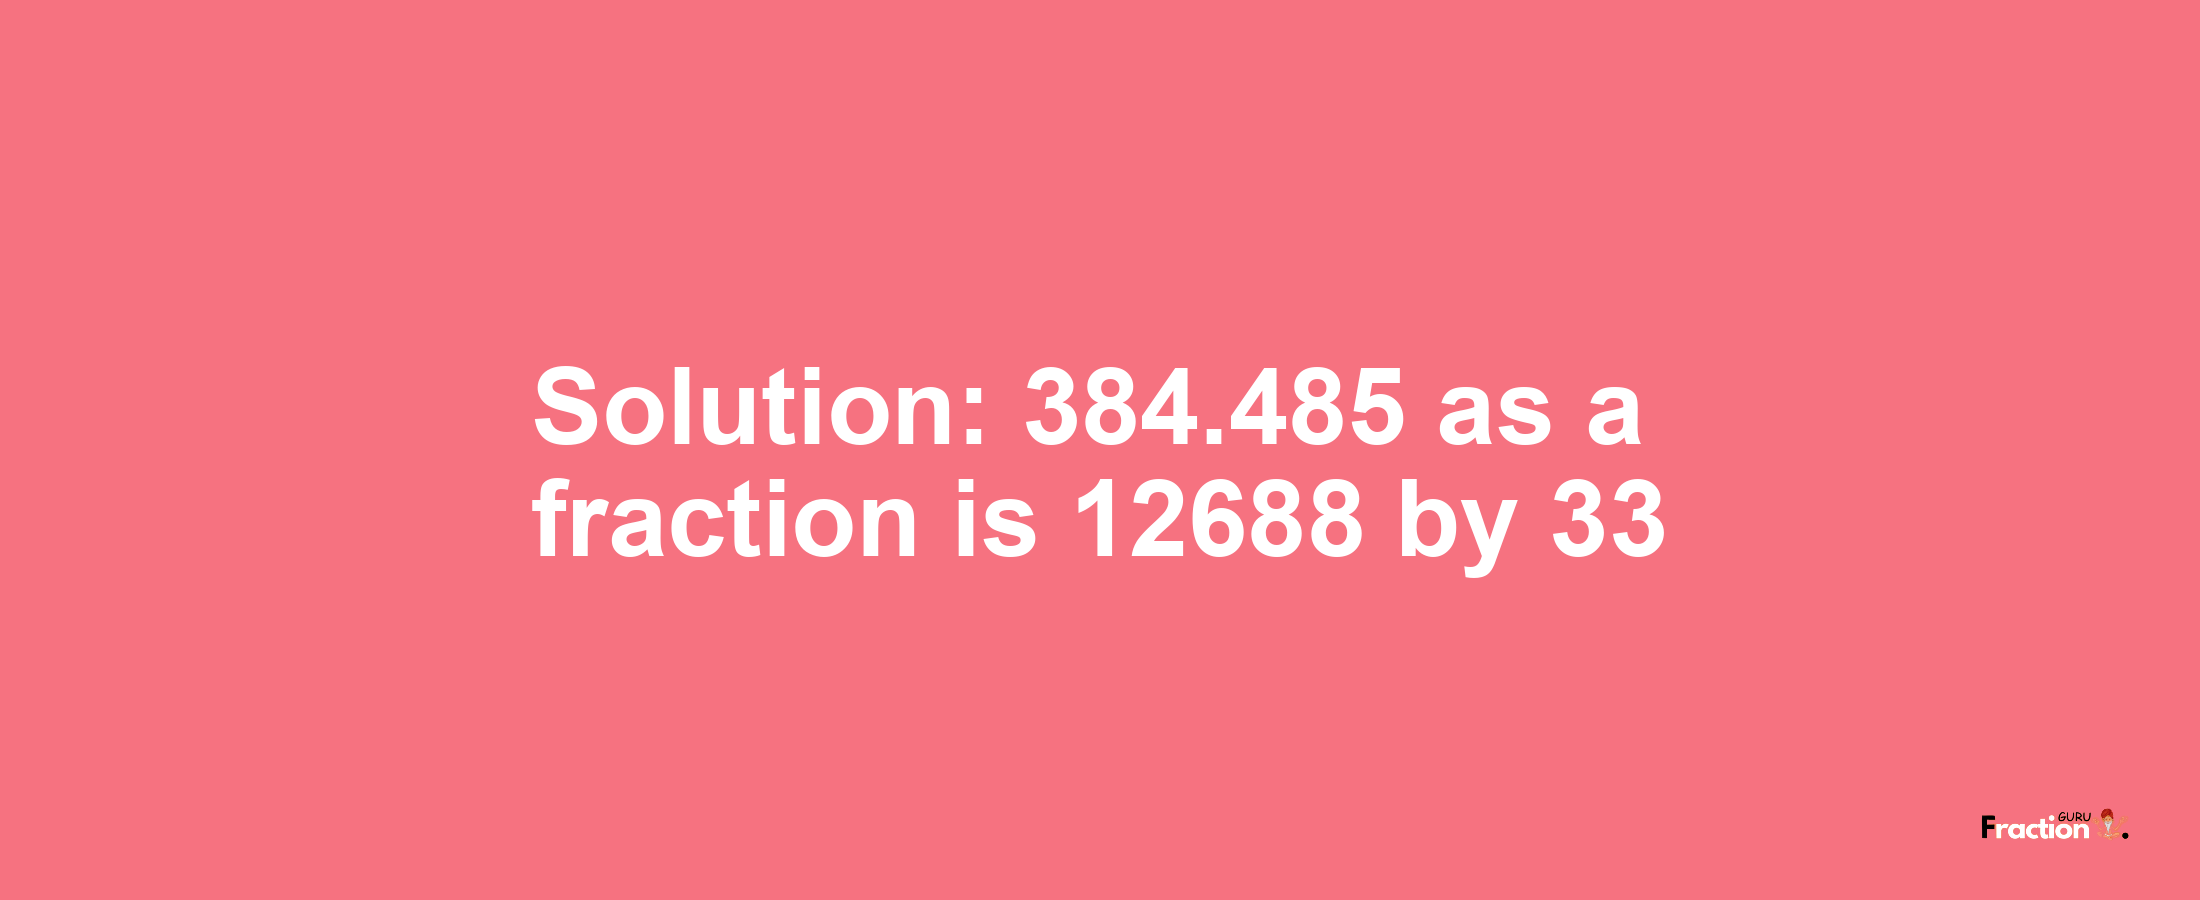 Solution:384.485 as a fraction is 12688/33